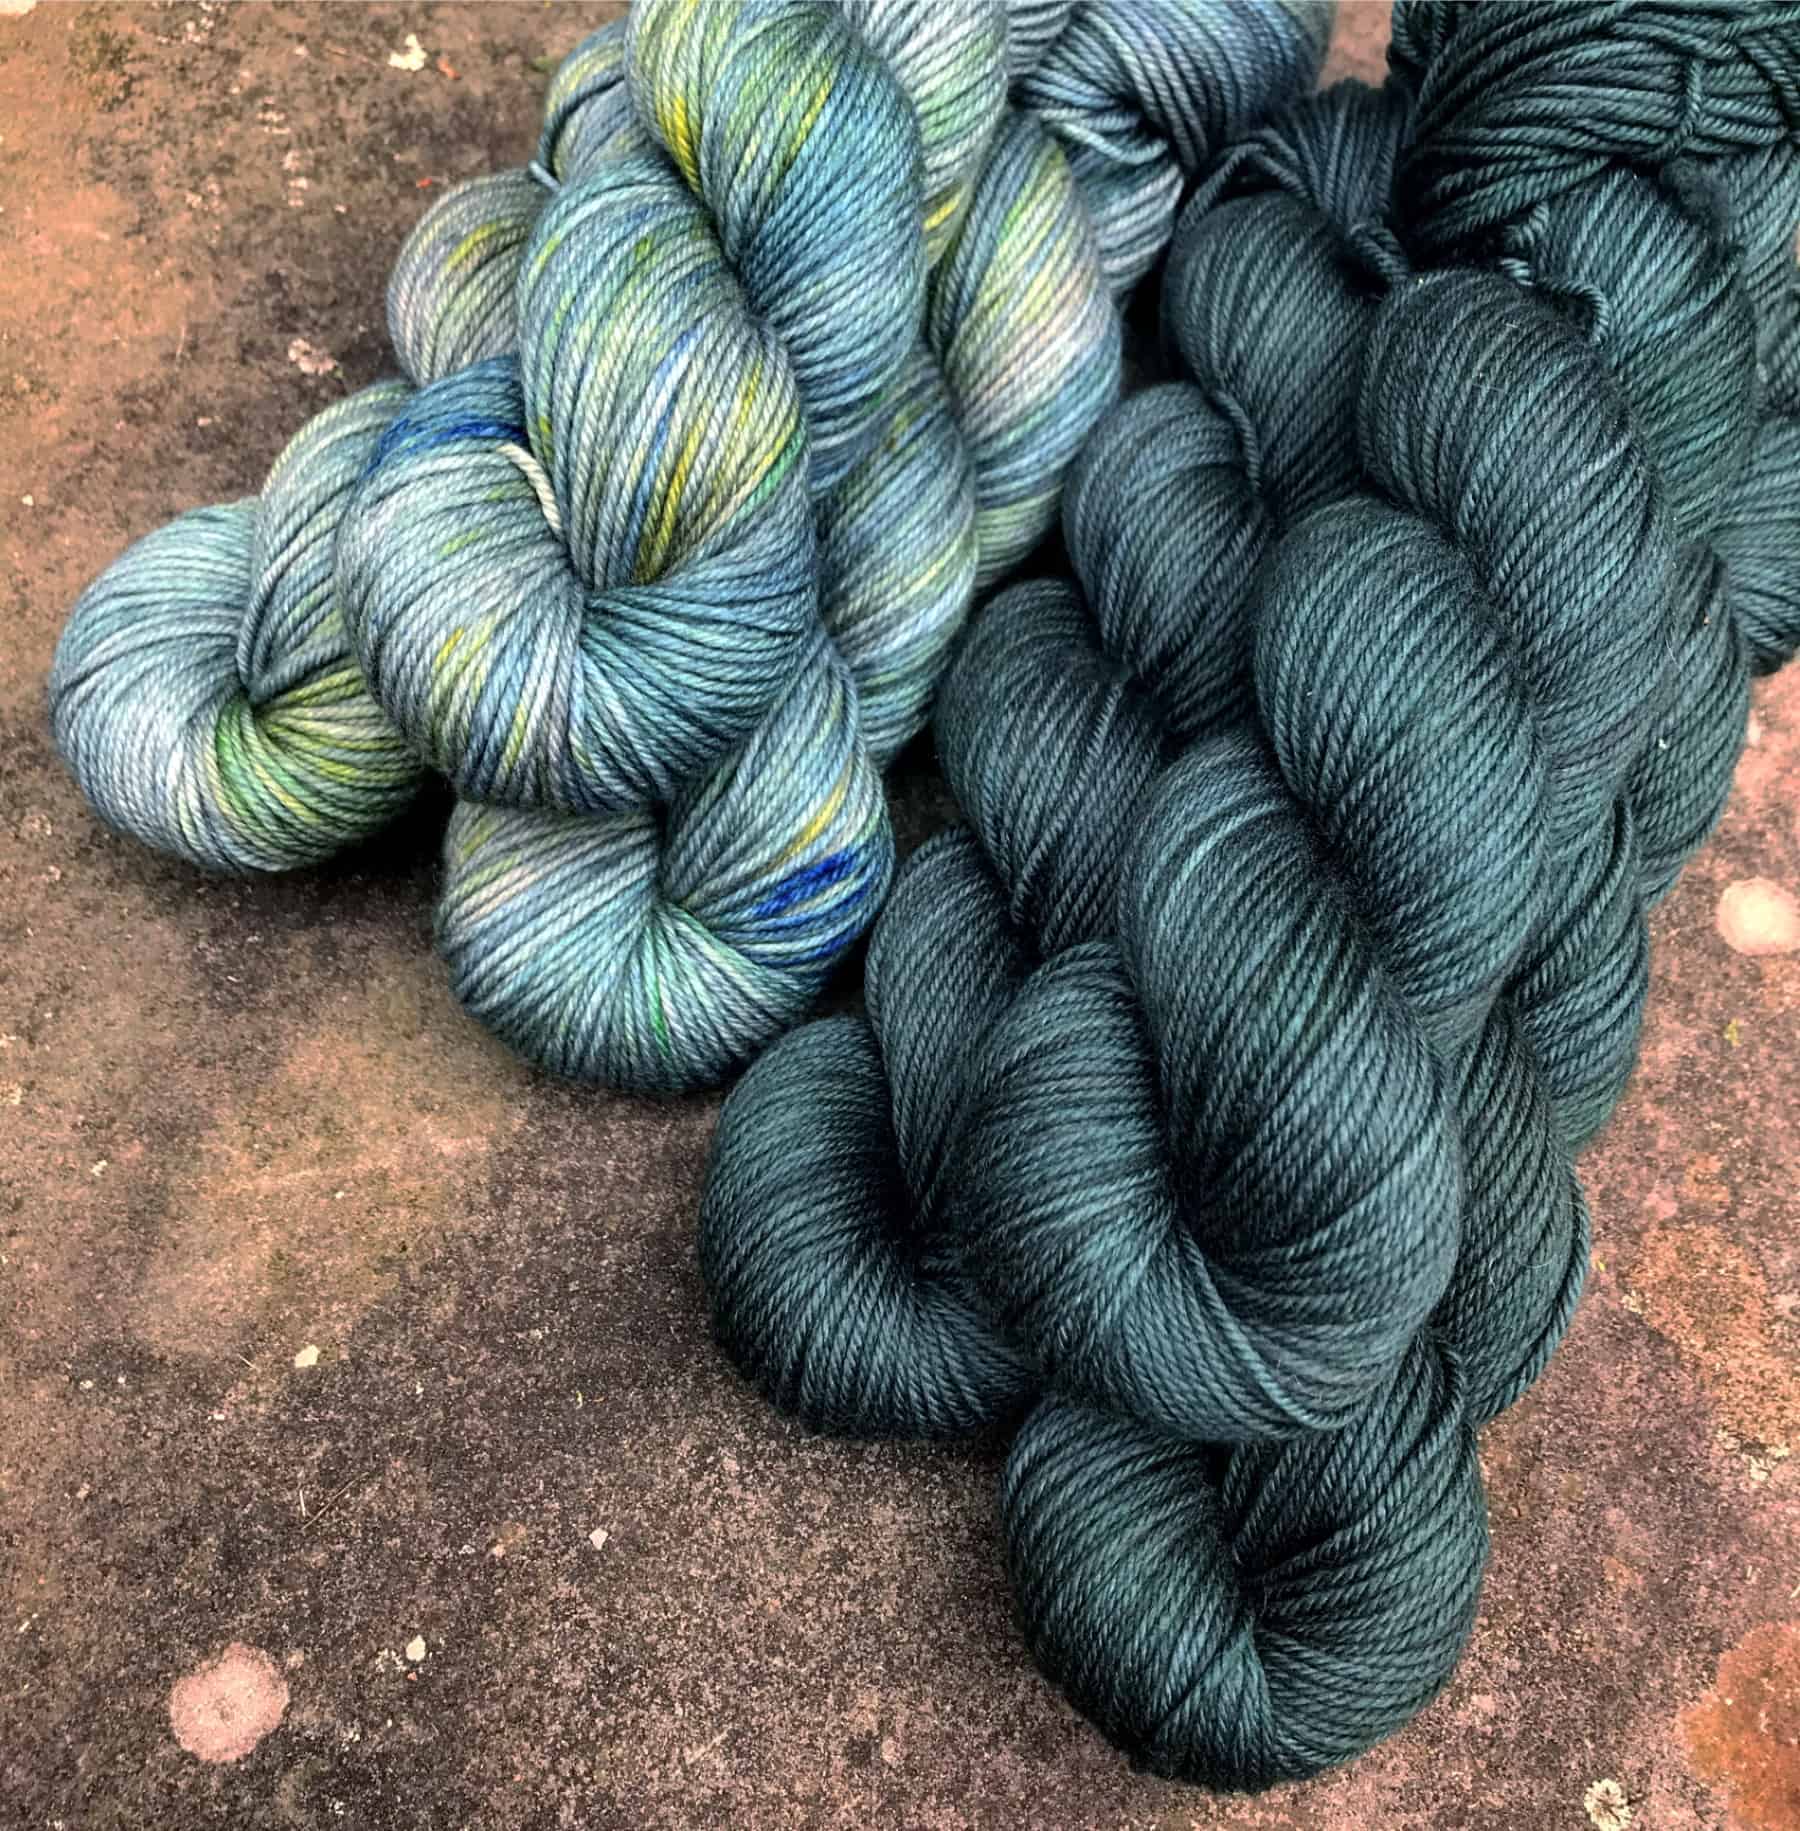 Teal and teal and green speckled yarn.